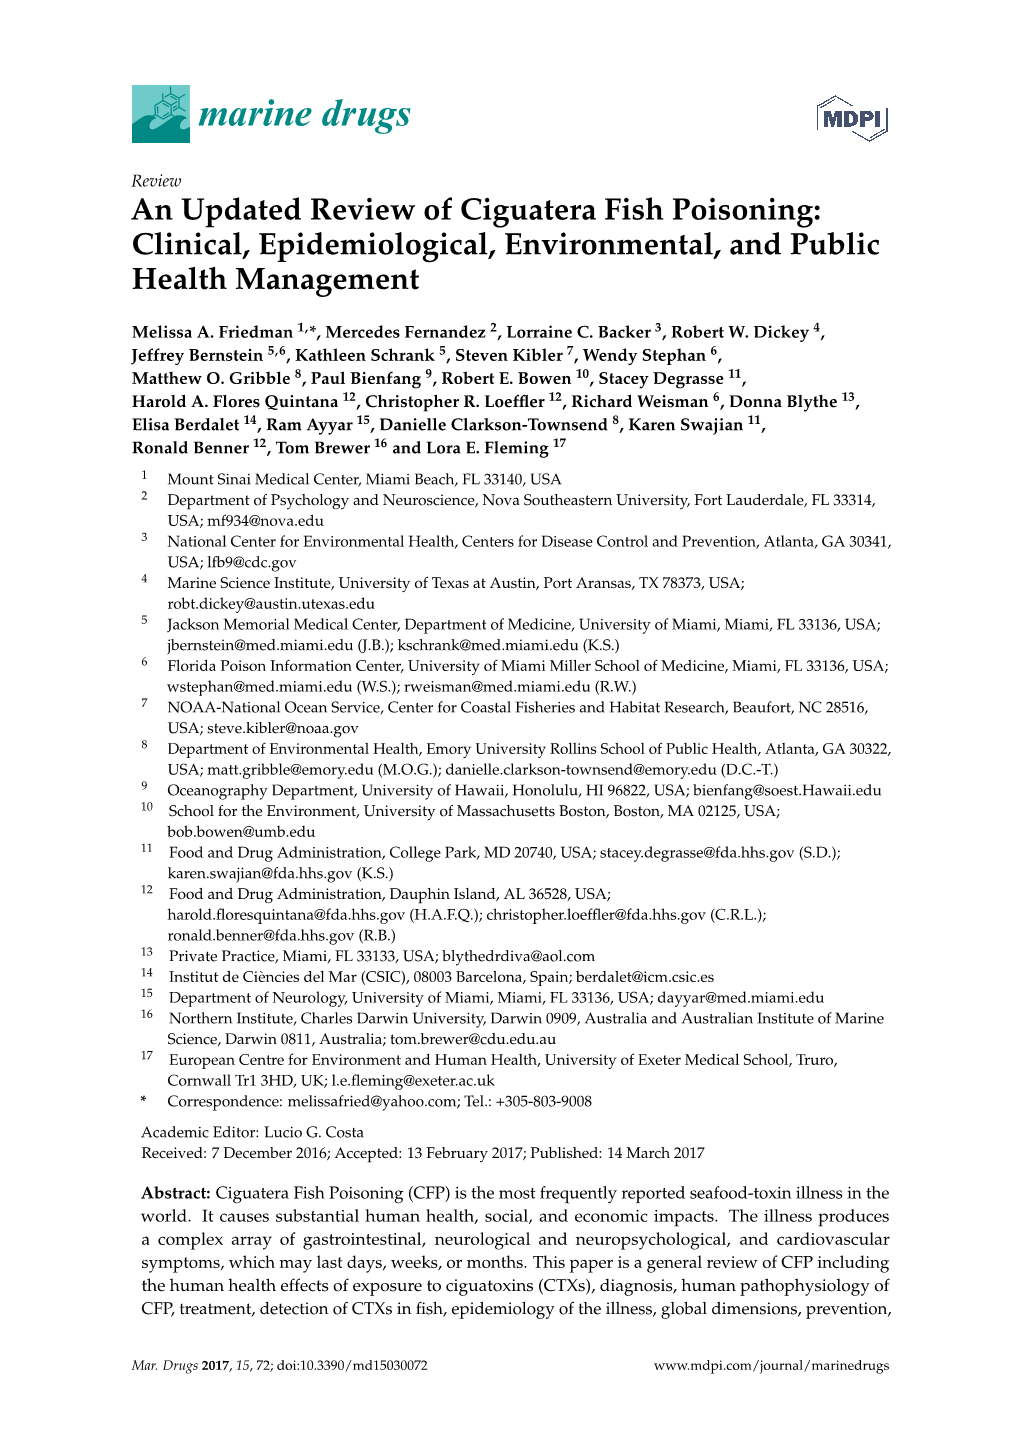 An Updated Review of Ciguatera Fish Poisoning: Clinical, Epidemiological, Environmental, and Public Health Management